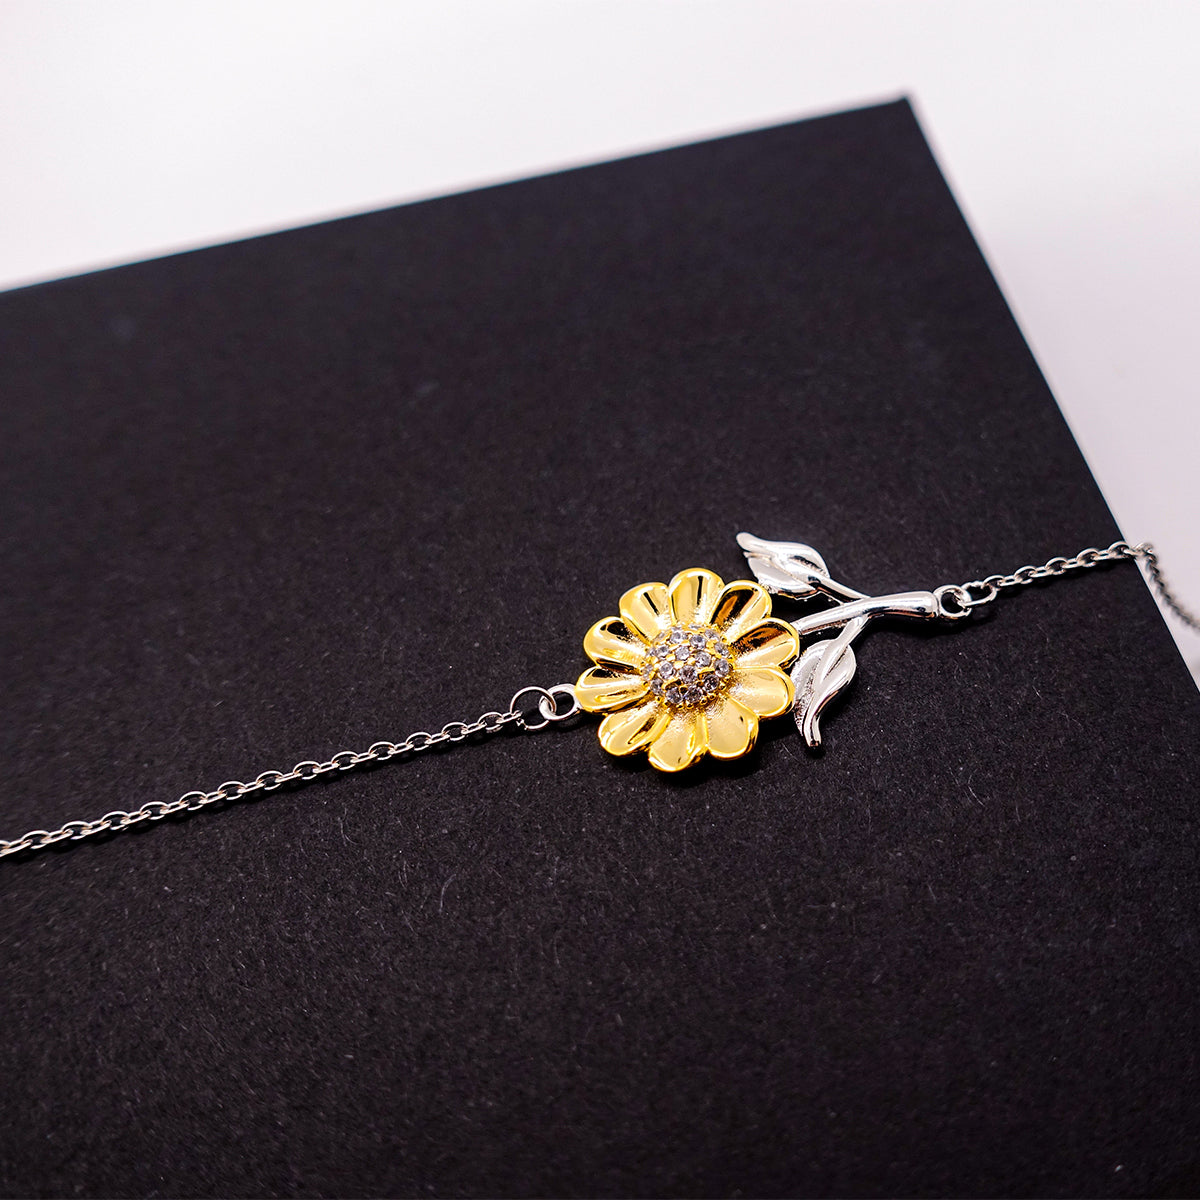 Engraved Sunflower Bracelet for Dad - Youll always have a special place in my heart. Perfect for Fathers Day, Birthday, Christmas. Unique gift for Dad to show love and appreciation.